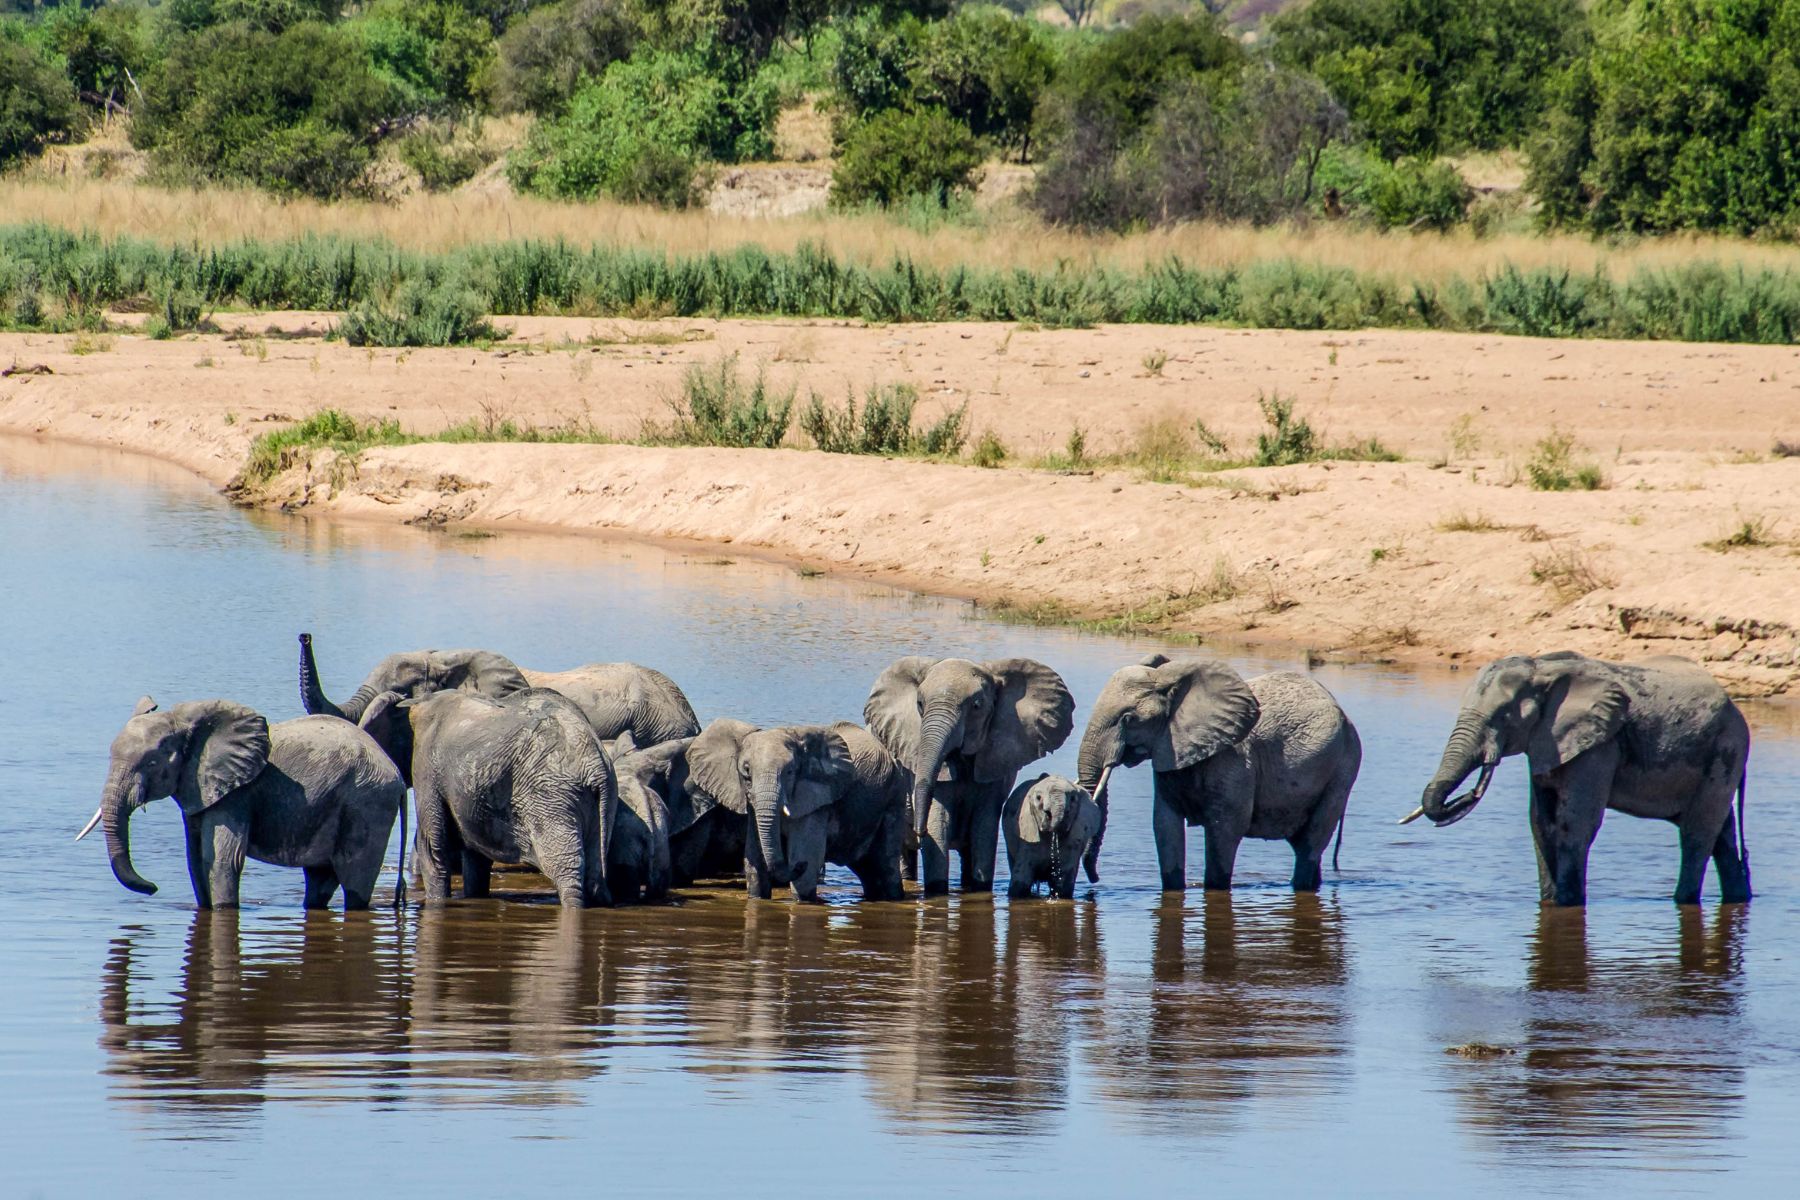 Elephants seen on safari wading in the Sabi Sands Reserve, South Africa